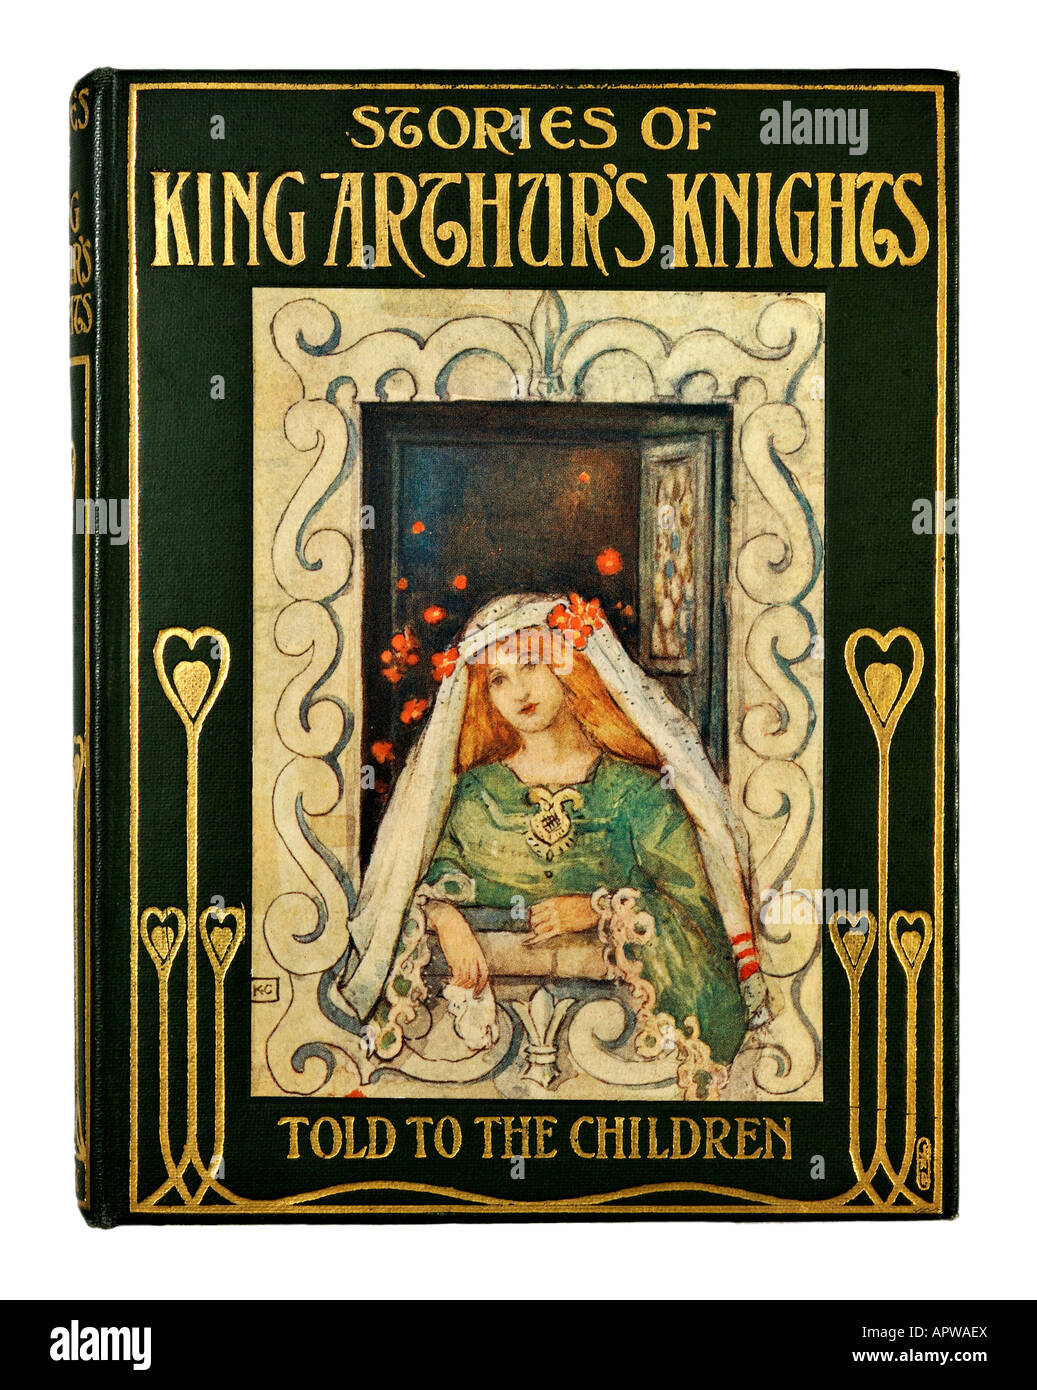 Children's Book Stories of King Arthur's Knights c 1900 EDITORIAL USE ONLY Stock Photo